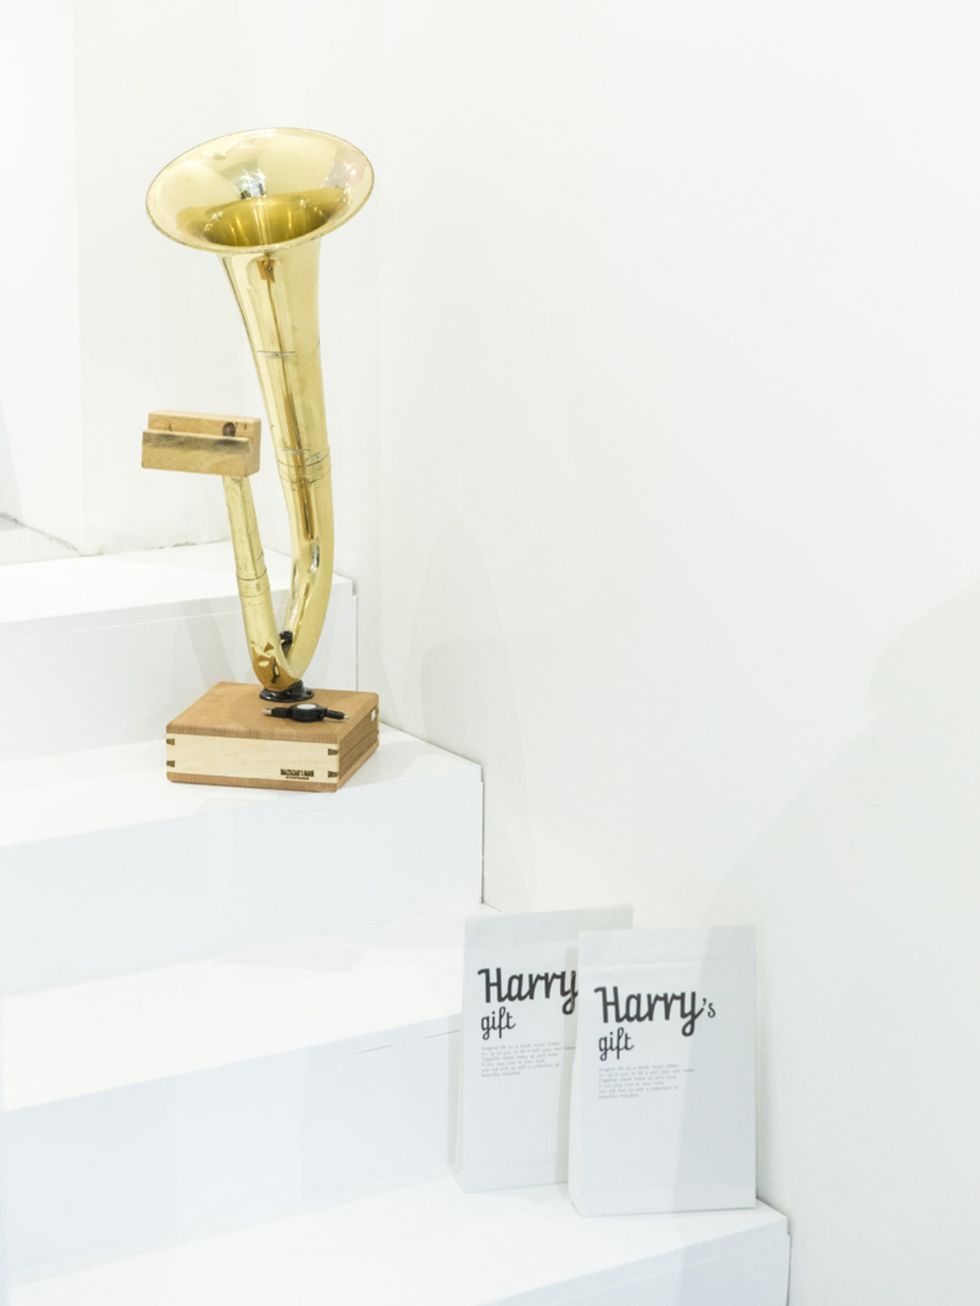 Trophy, Brass, Material property, Natural material, Award, Still life photography, Bronze, 